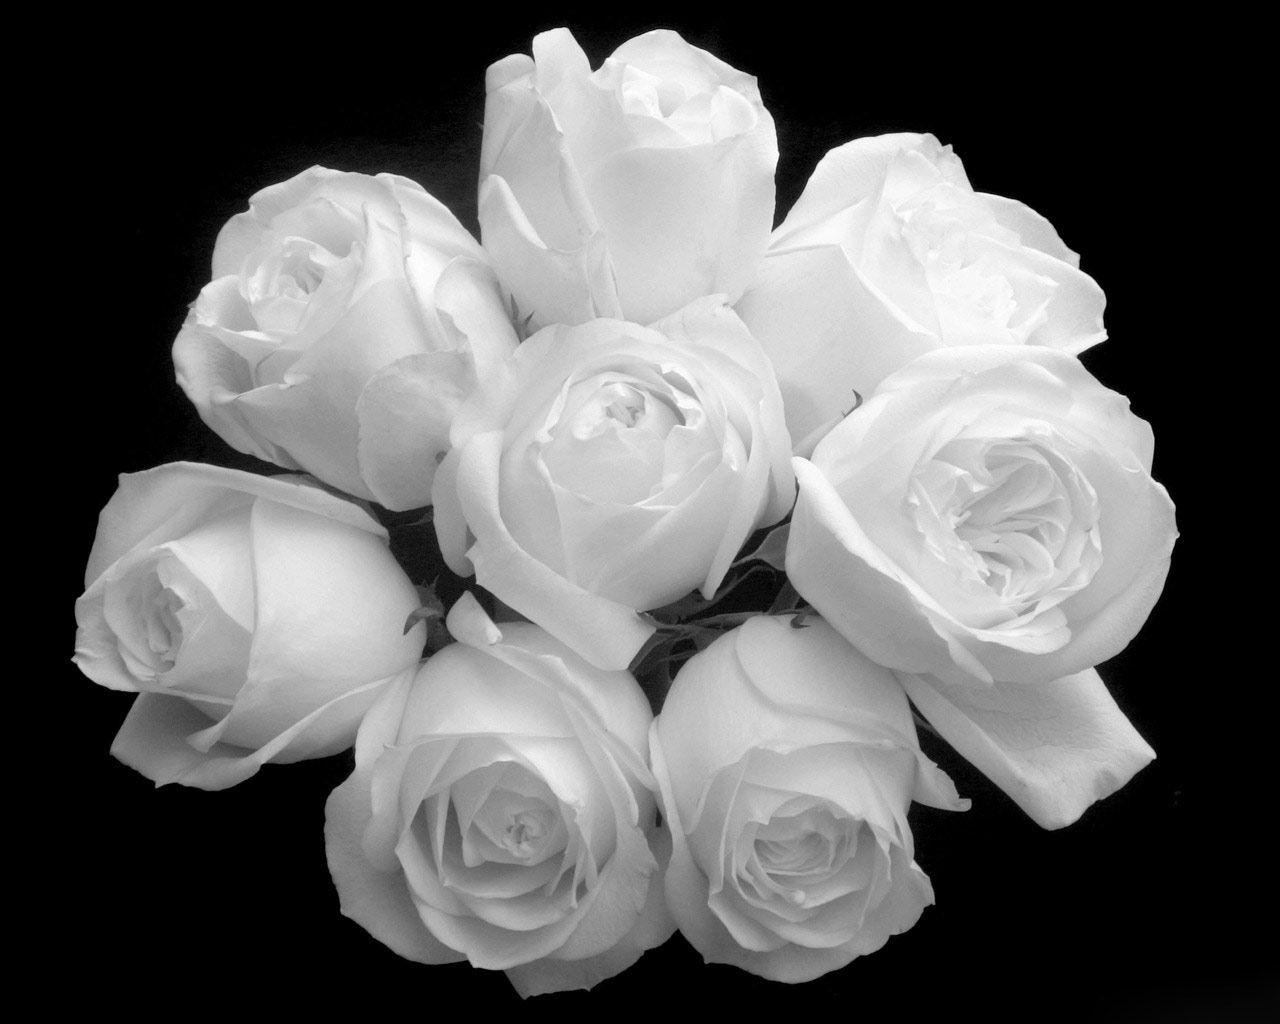 Awesome White Rose Wallpaper For Desktop High Resolution Background